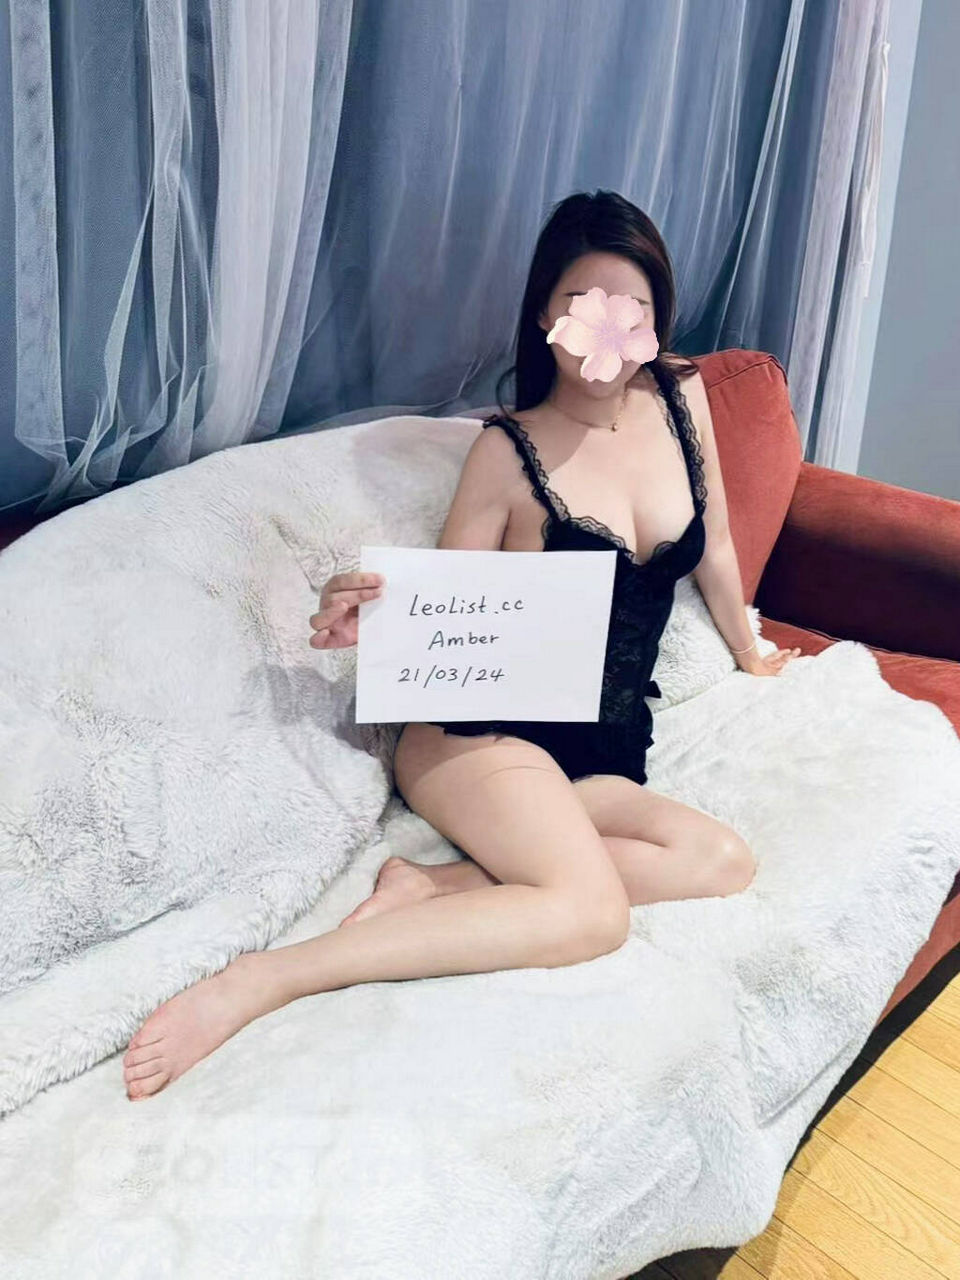 Escorts Calgary, Alberta first time in city 120hh